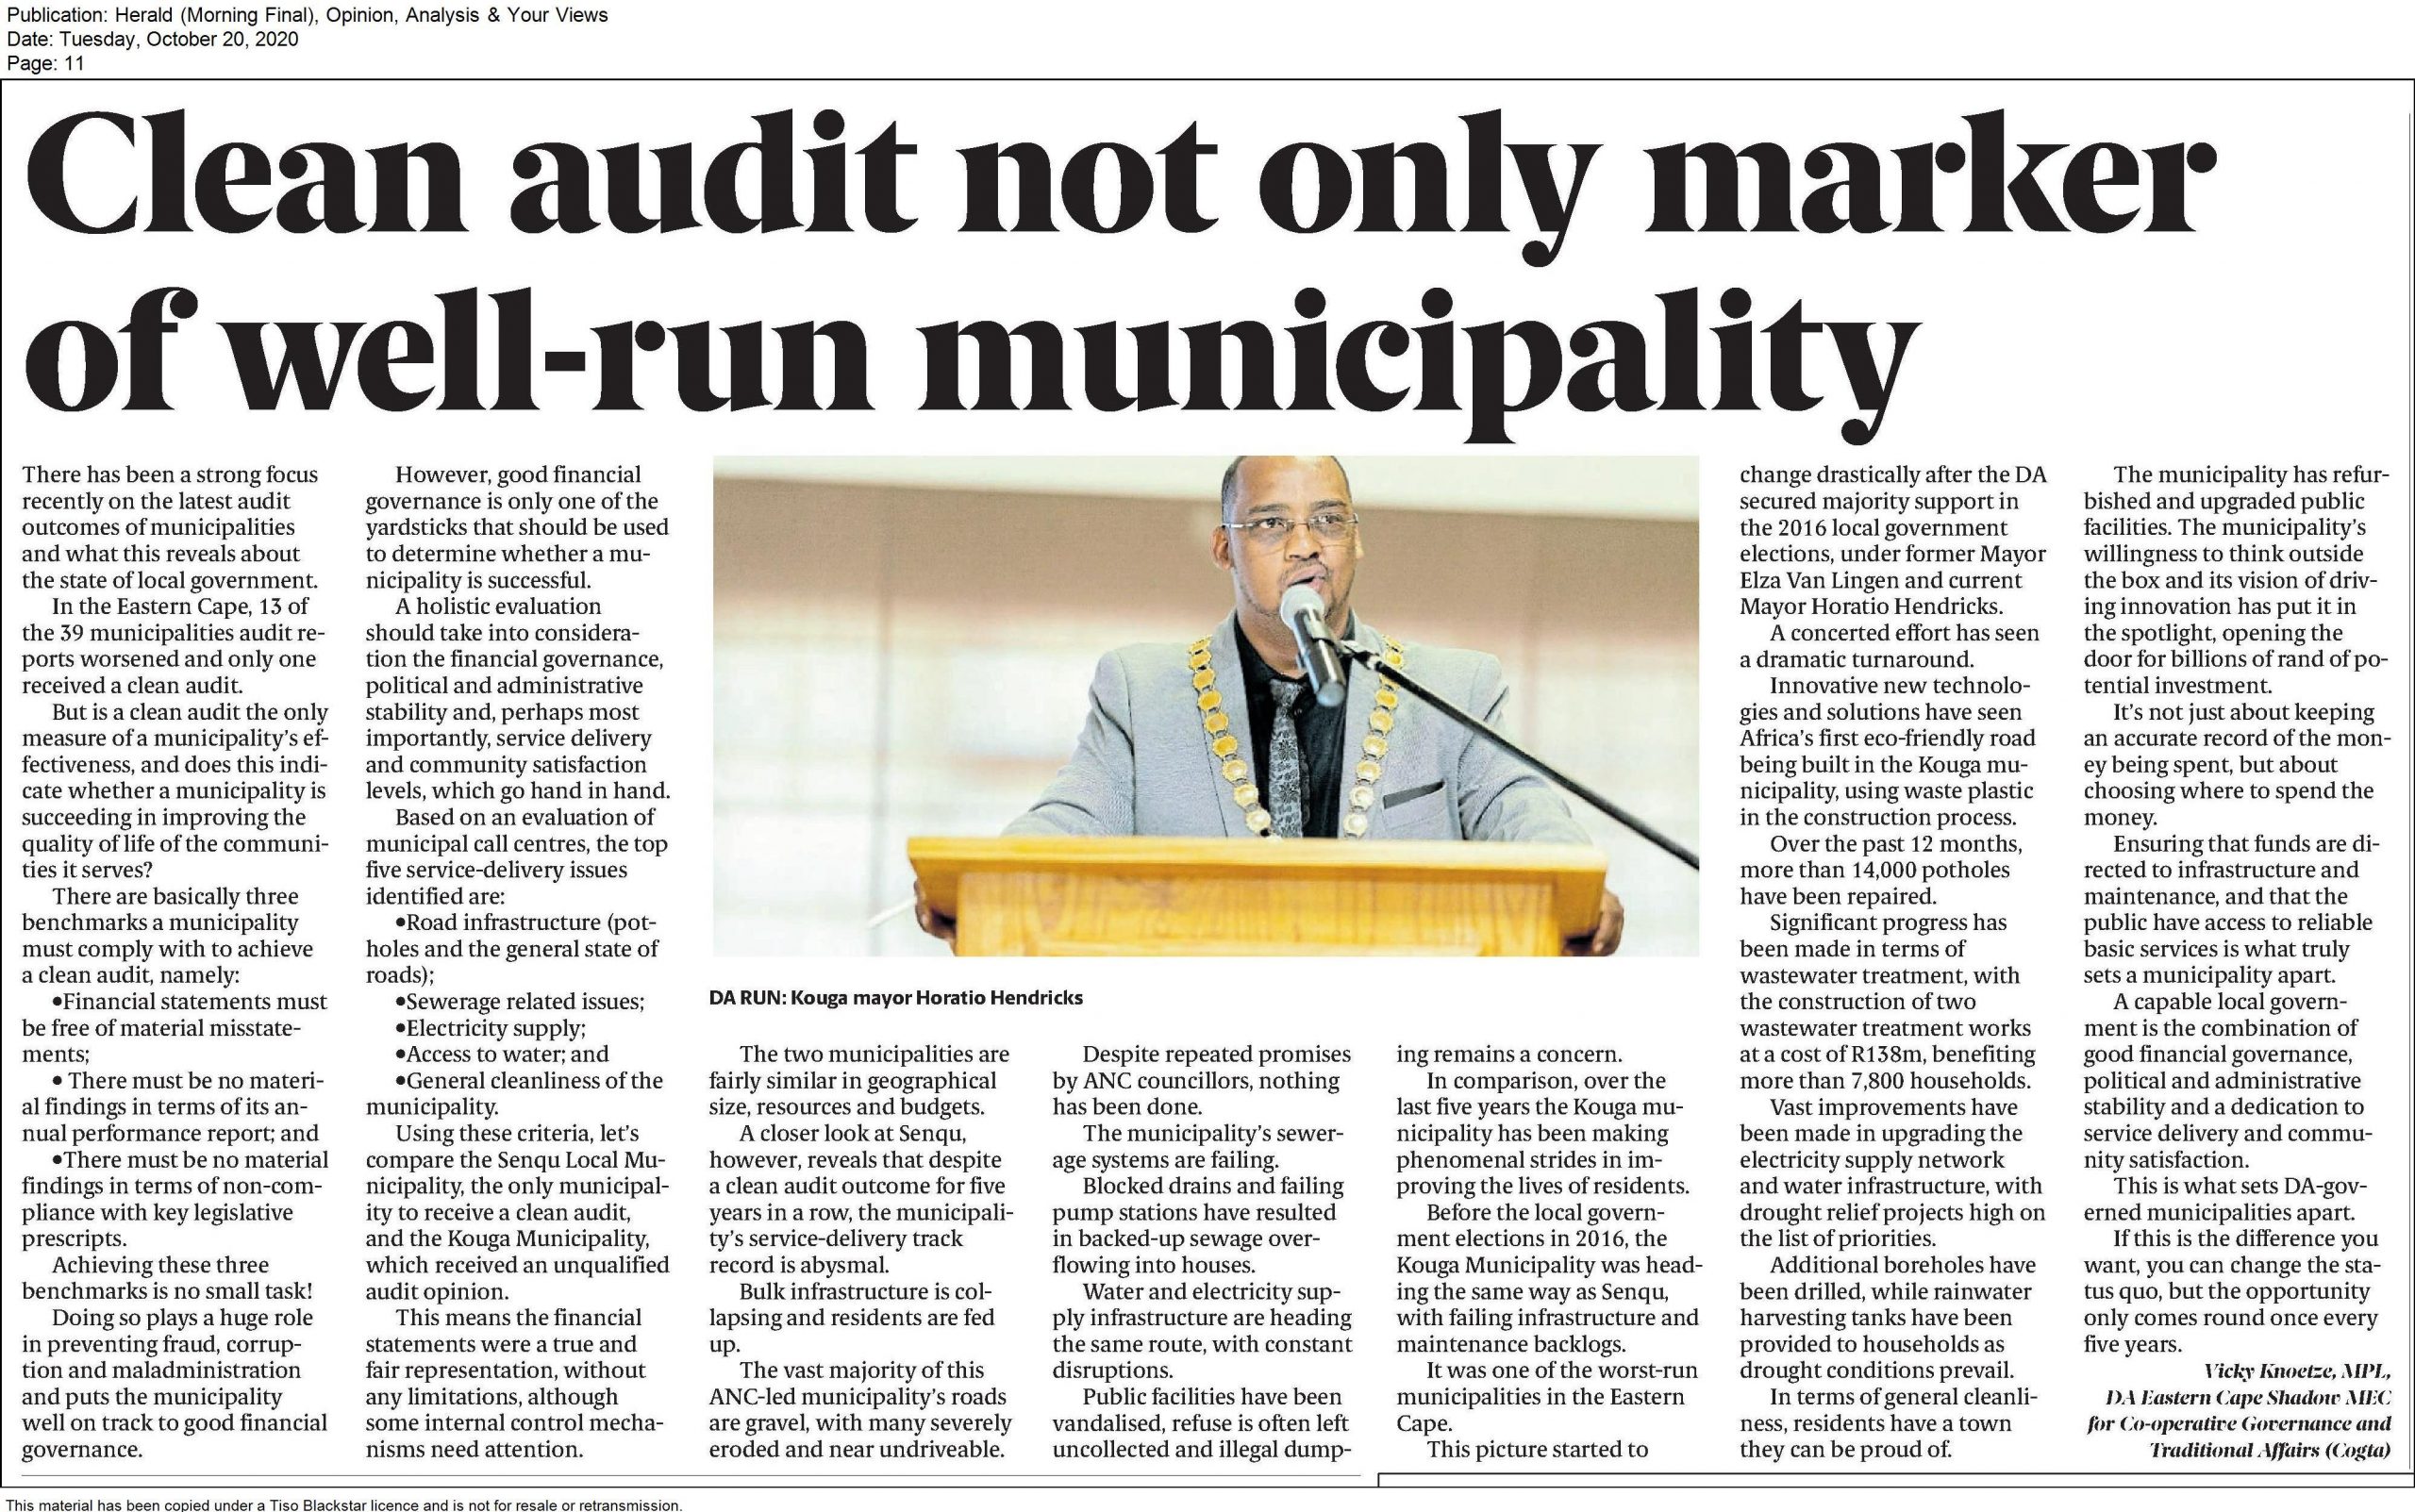 Clean audits not the only marker of well-run municipality